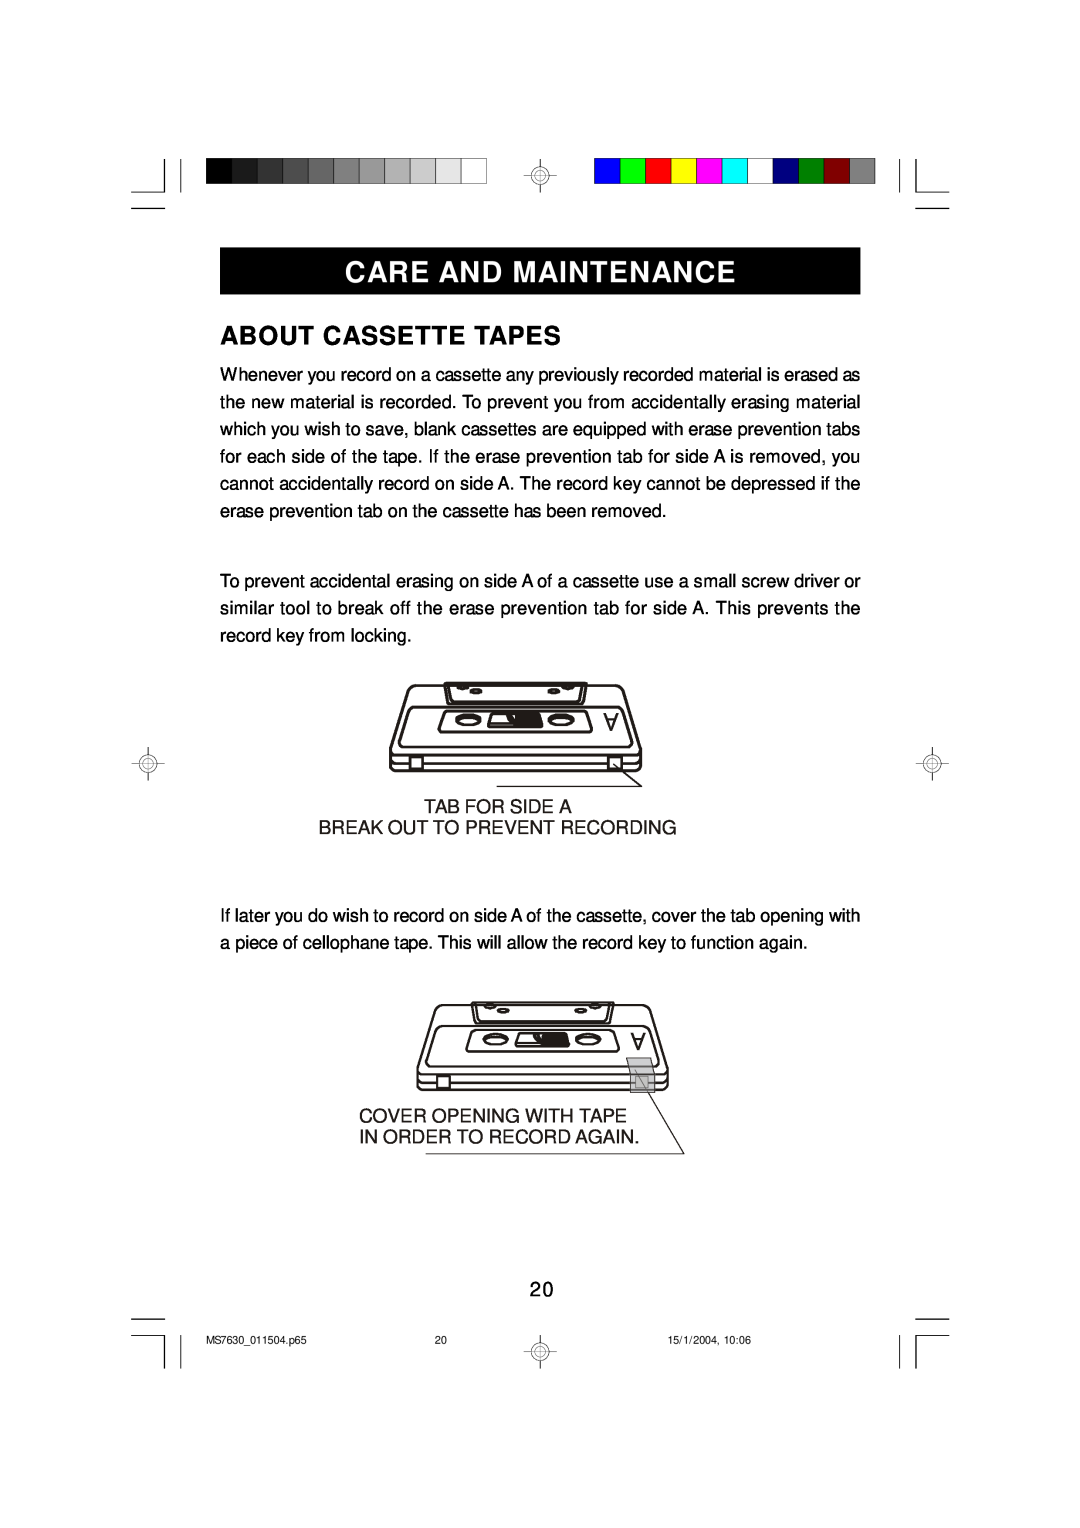 Emerson MS7630 owner manual Care And Maintenance, About Cassette Tapes, Tab For Side A Break Out To Prevent Recording 